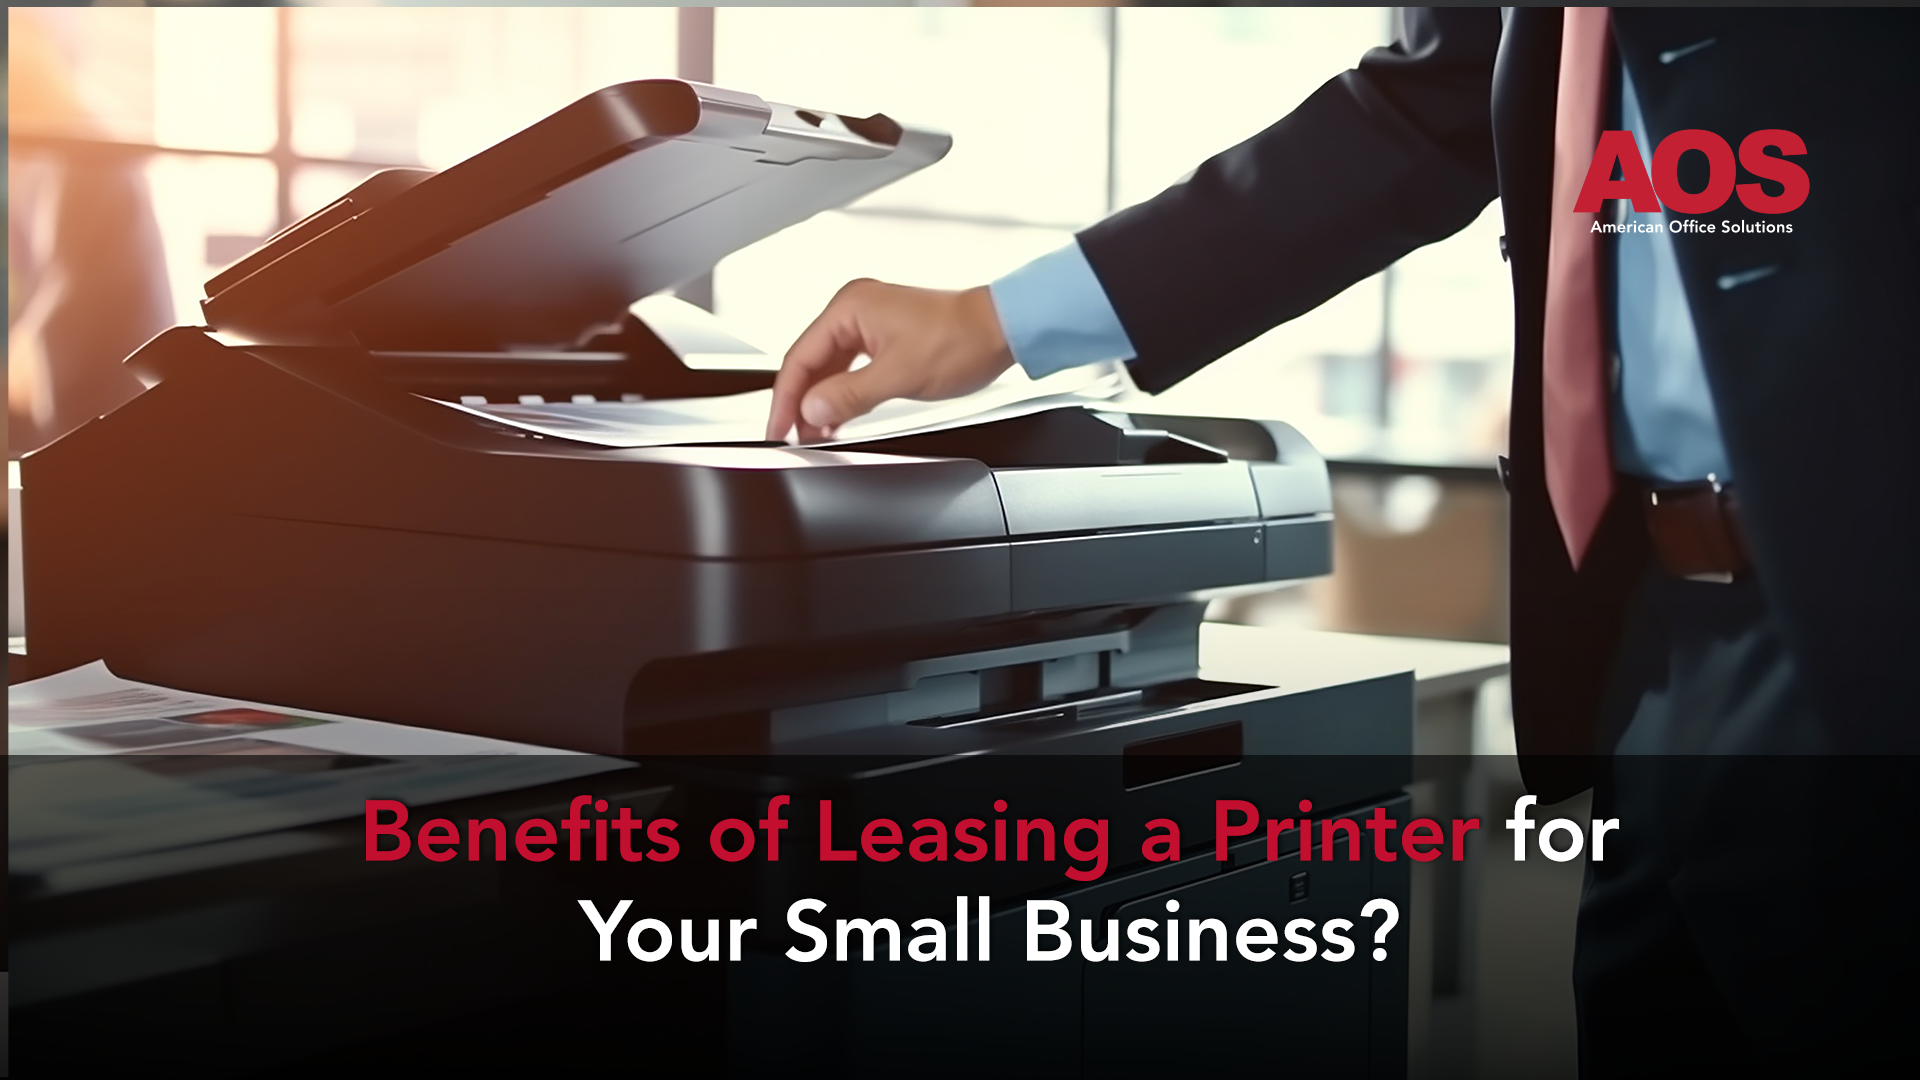 Benefits of Leasing a Printer for Your Small Business